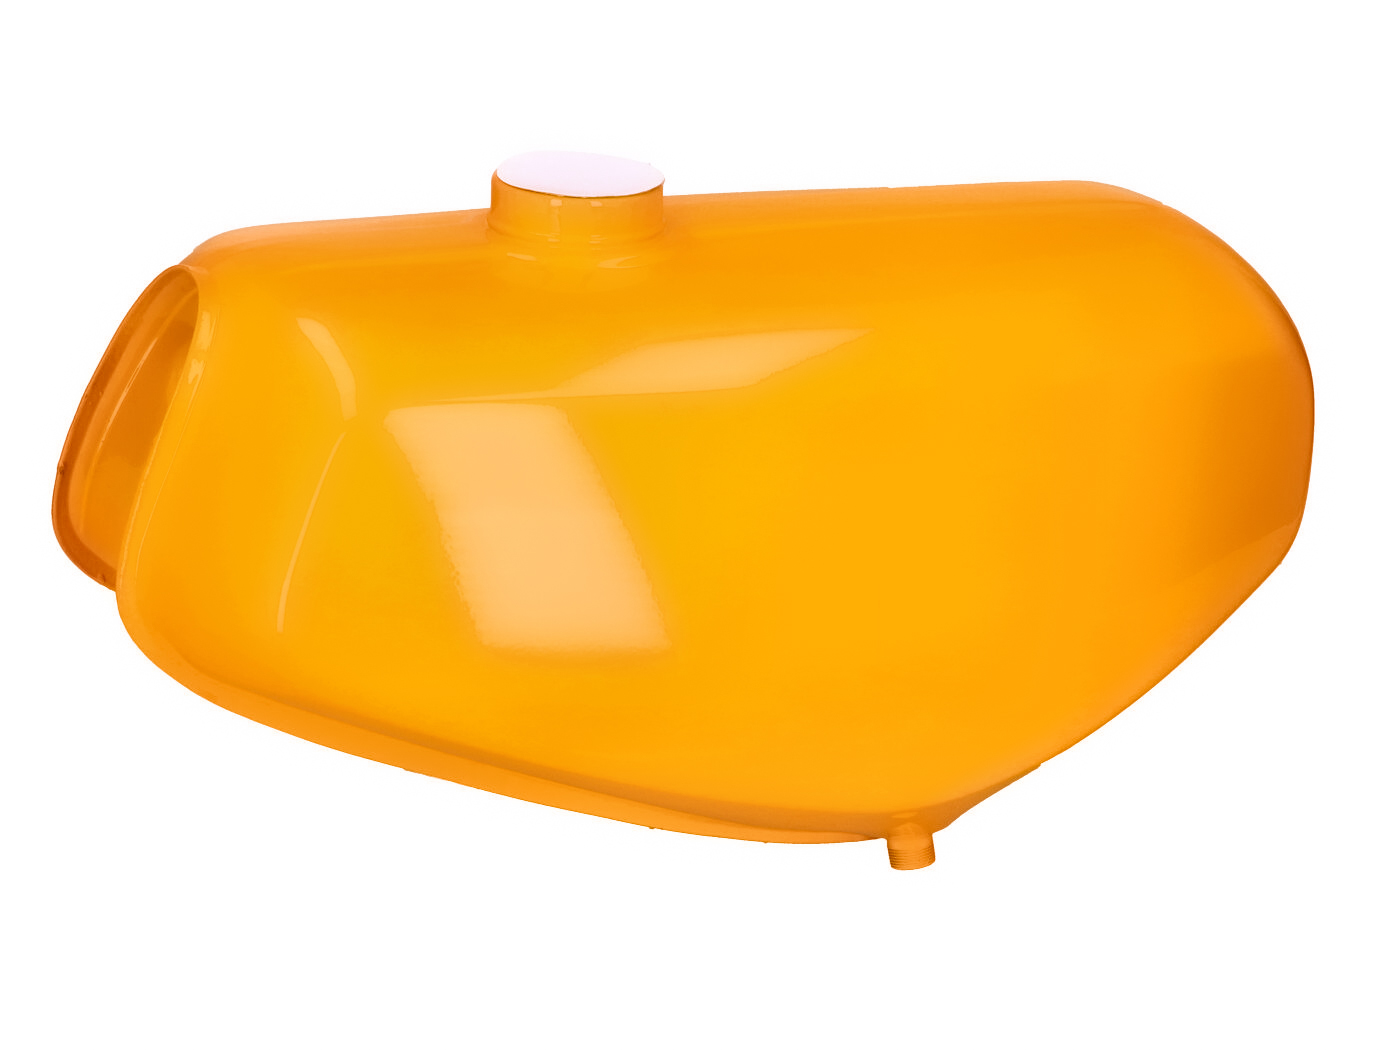 Fuel tank & side cover Sahara for Simson S50, S51, S70